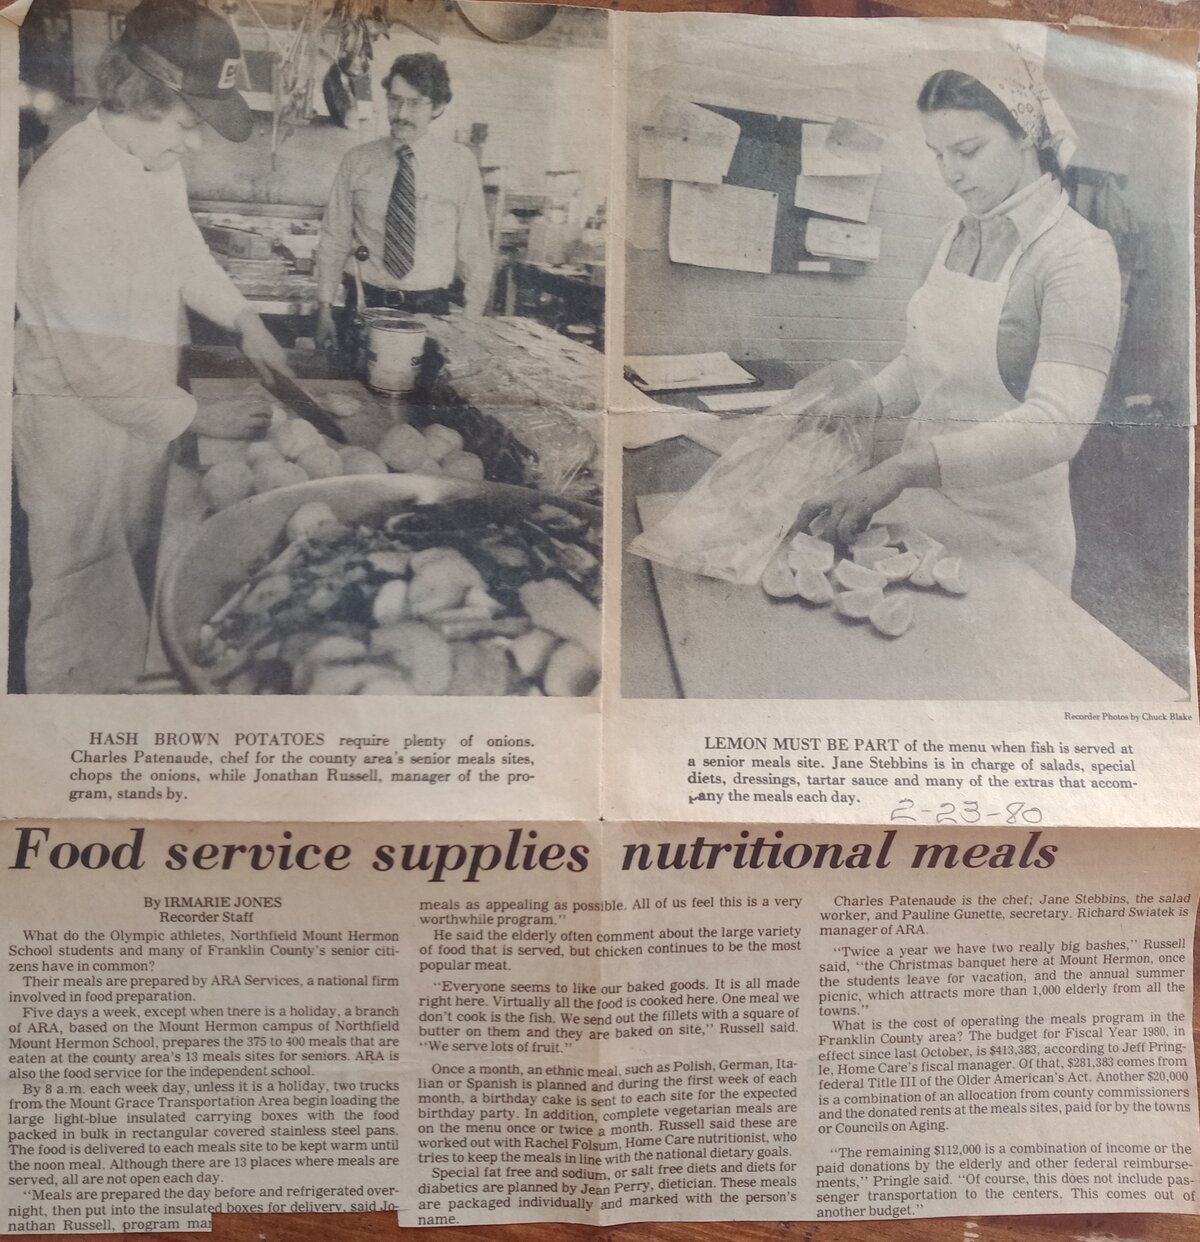 This 1980’s newspaper clipping from The Recorder, courtesy of Jane Dion, née Stebbins, pictured on the right, shows food being prepared for 13 congregate elder meal sites at a facility on the Northfield Mount Hermon campus.